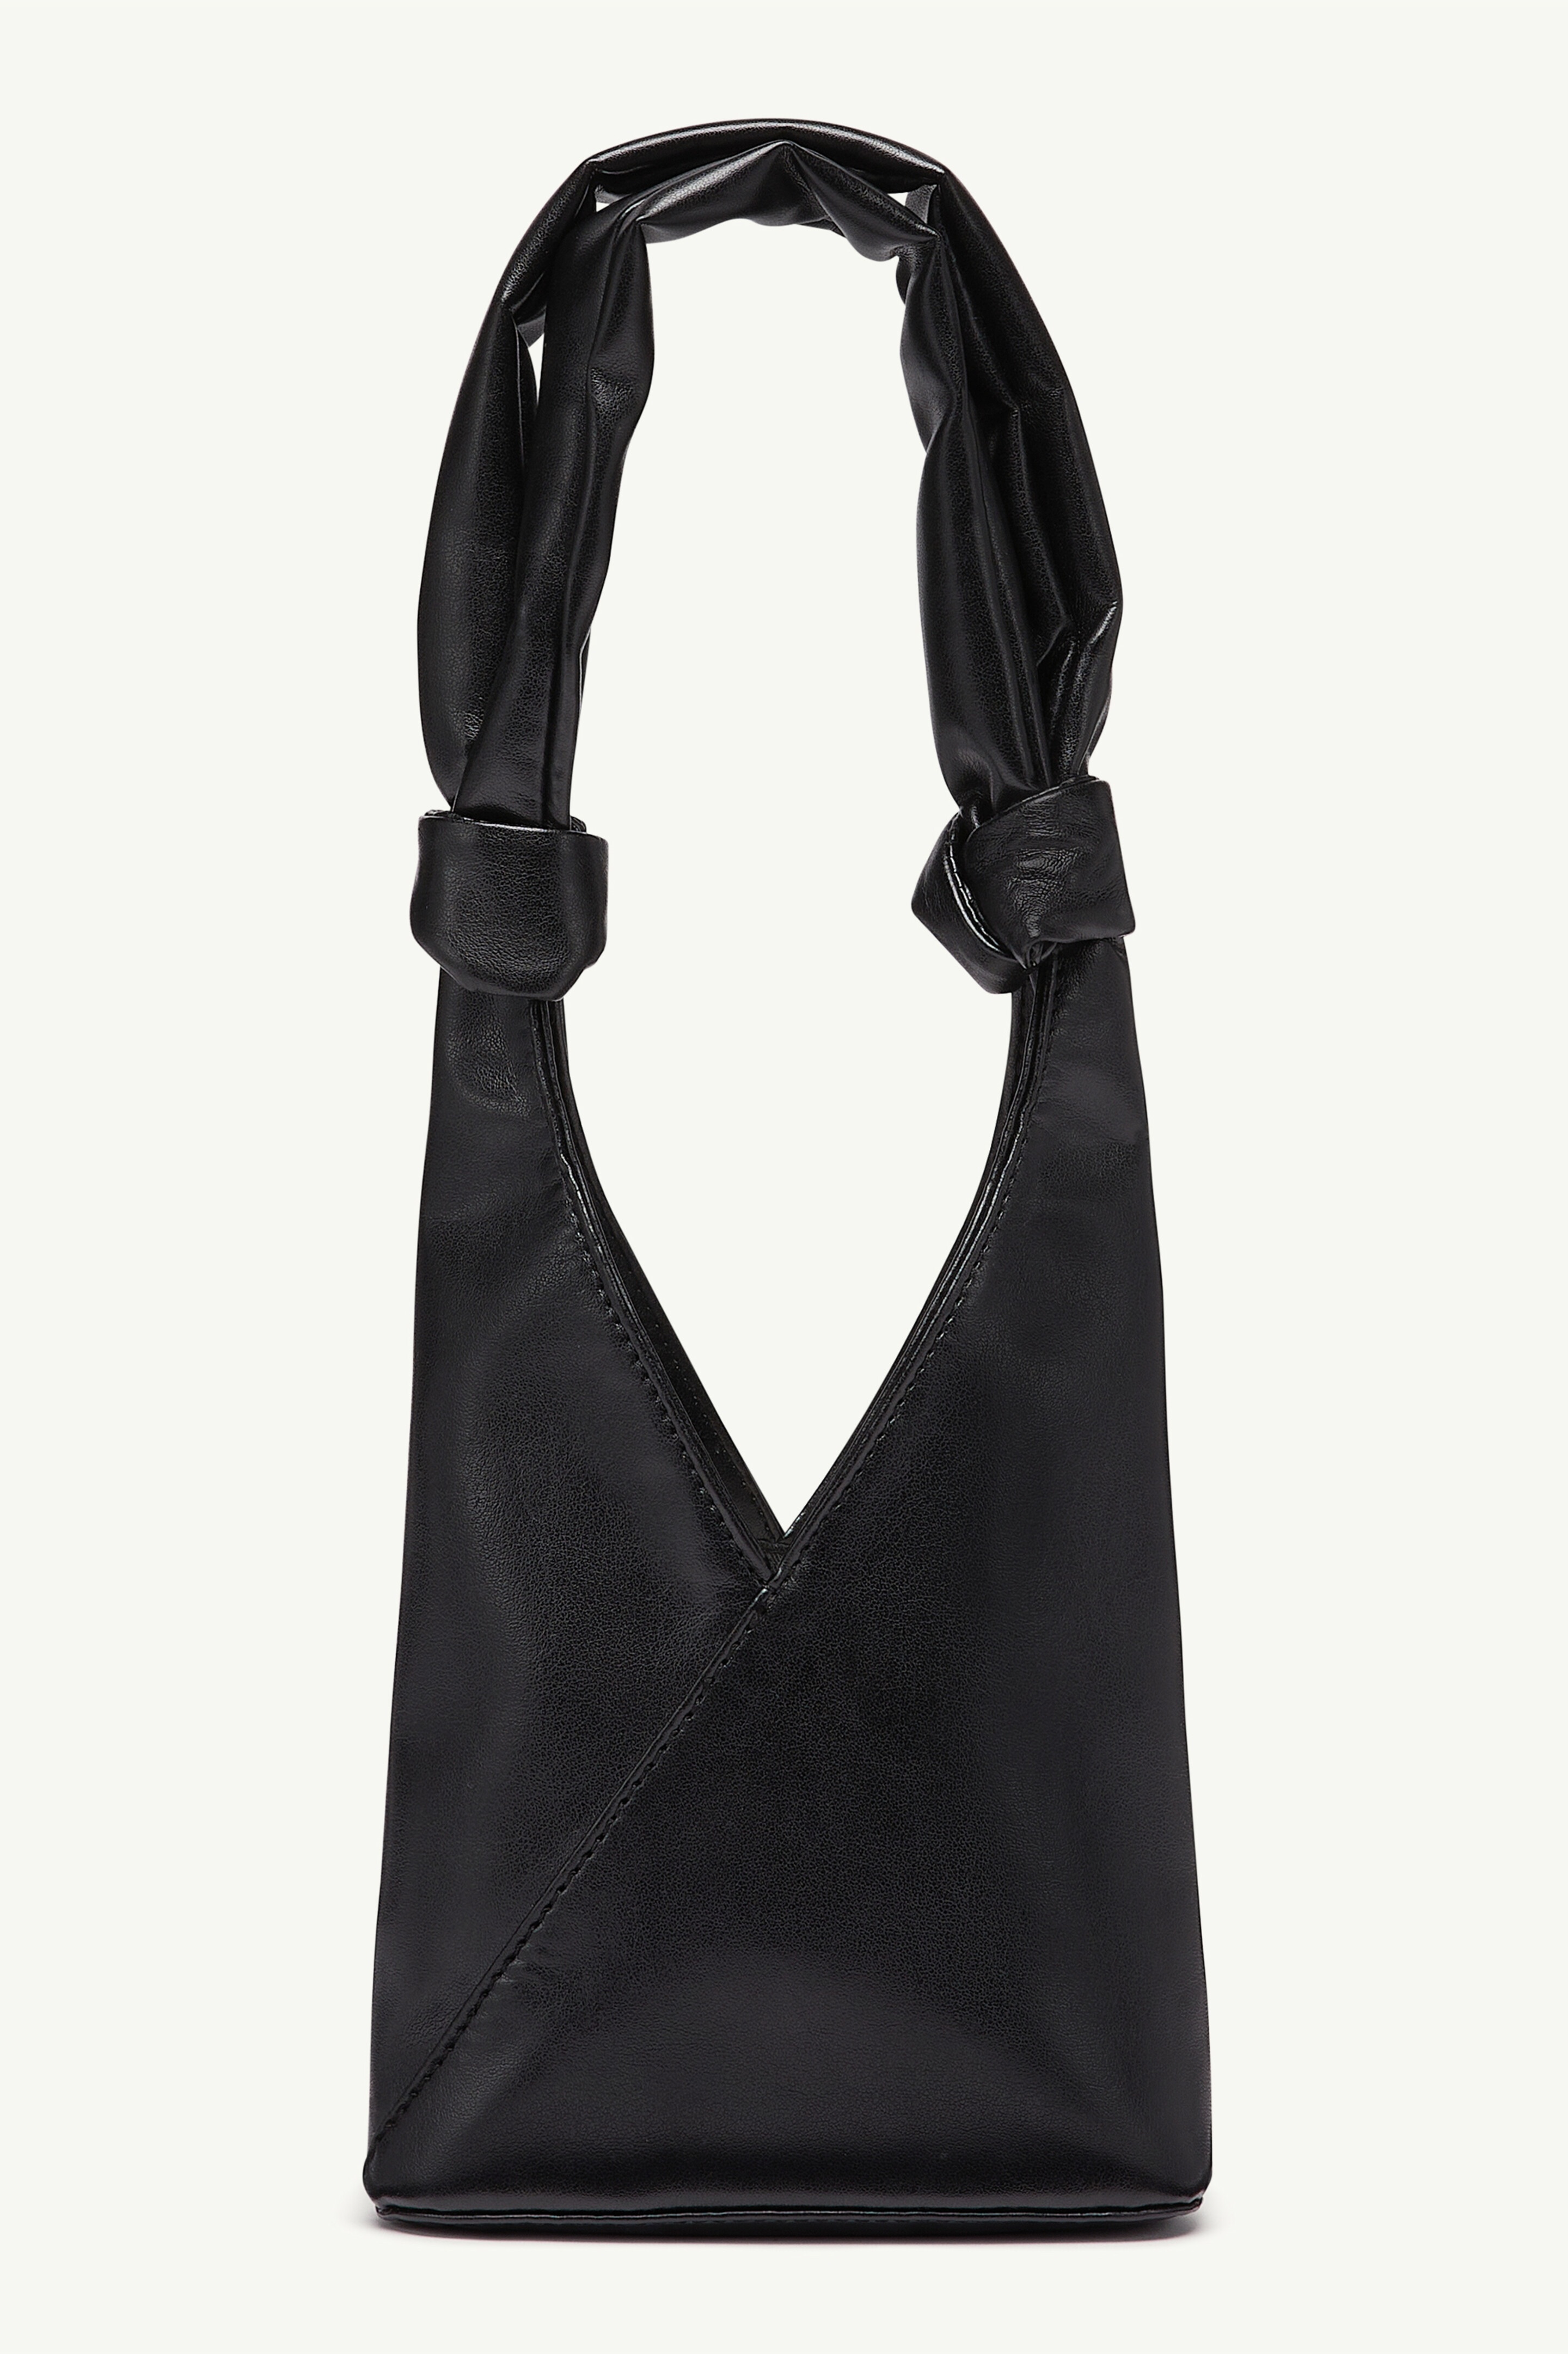 Japanese knotted bag - 1